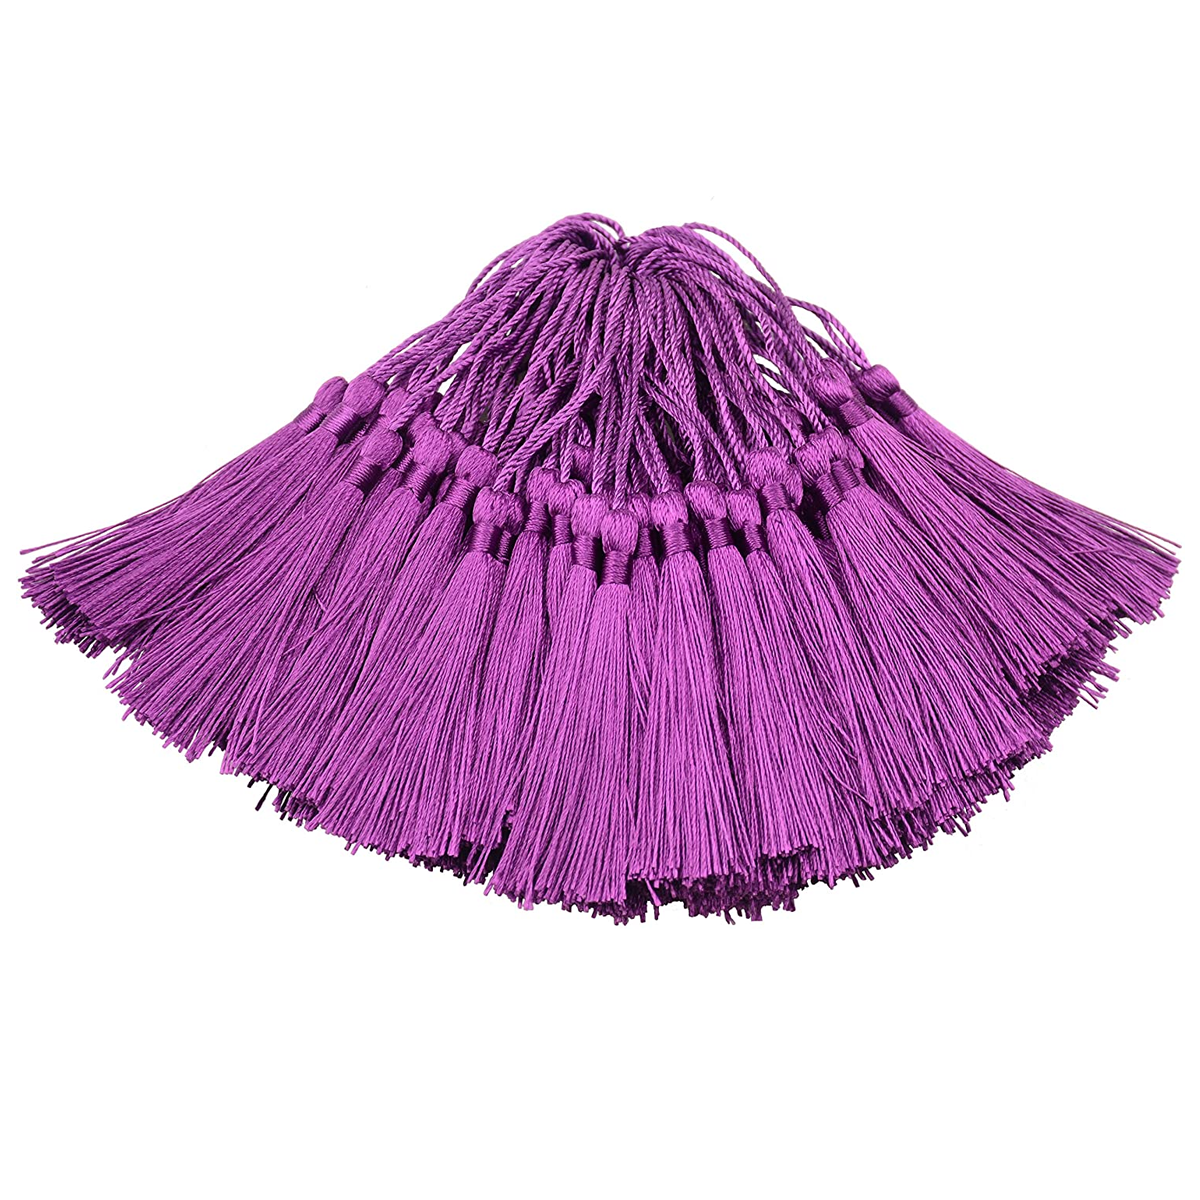 96 PCS Dark Aubergine Soft Craft Tassels with Loops for Jewelry Making, DIY, Bookmark, - WILLOW